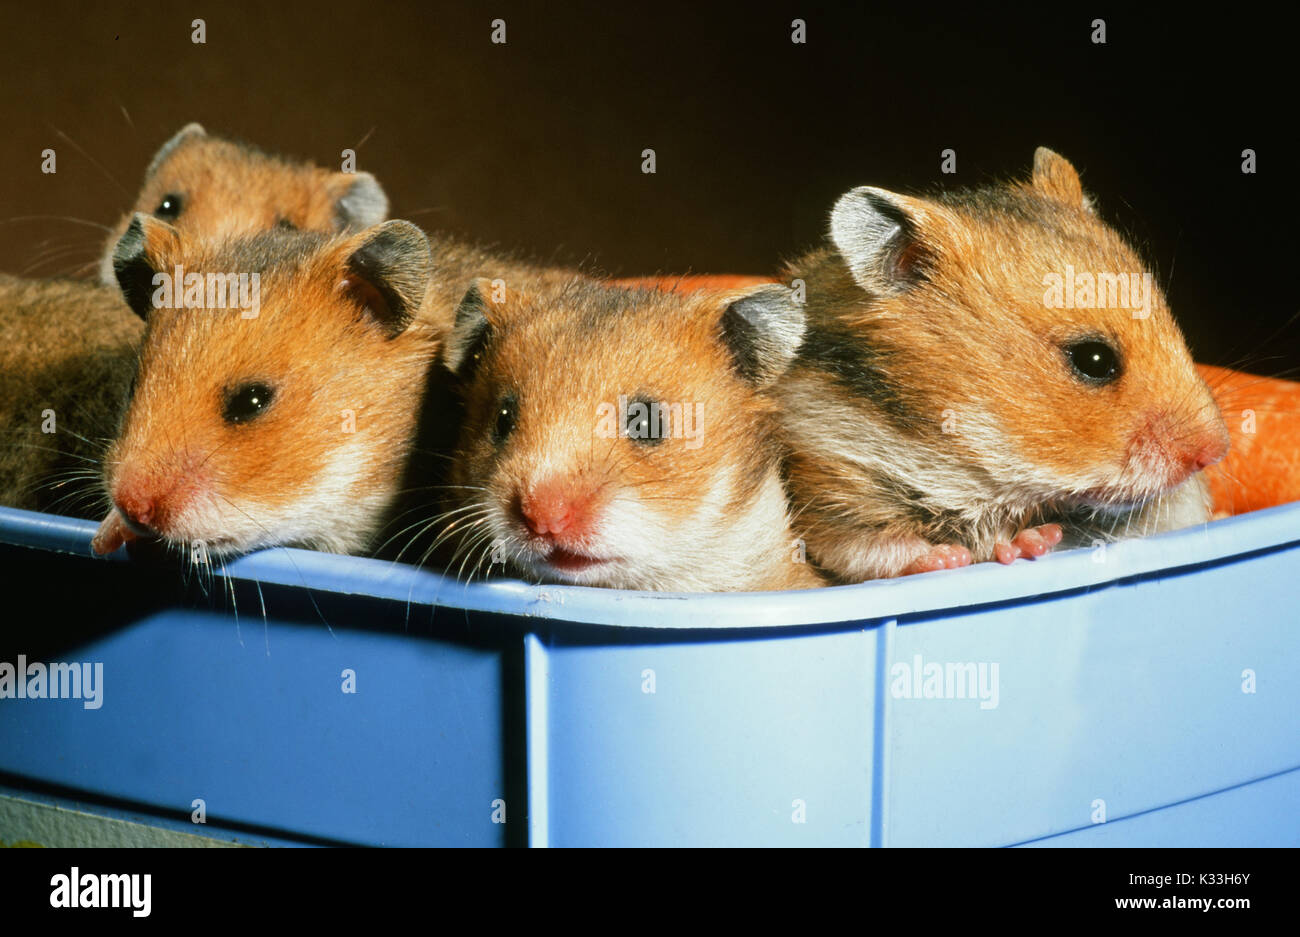 Syrian or Golden Hamsters Mesocricetus auratus. Mobile young, eyes just opening at 21 days old, in a food bowl. Stock Photo